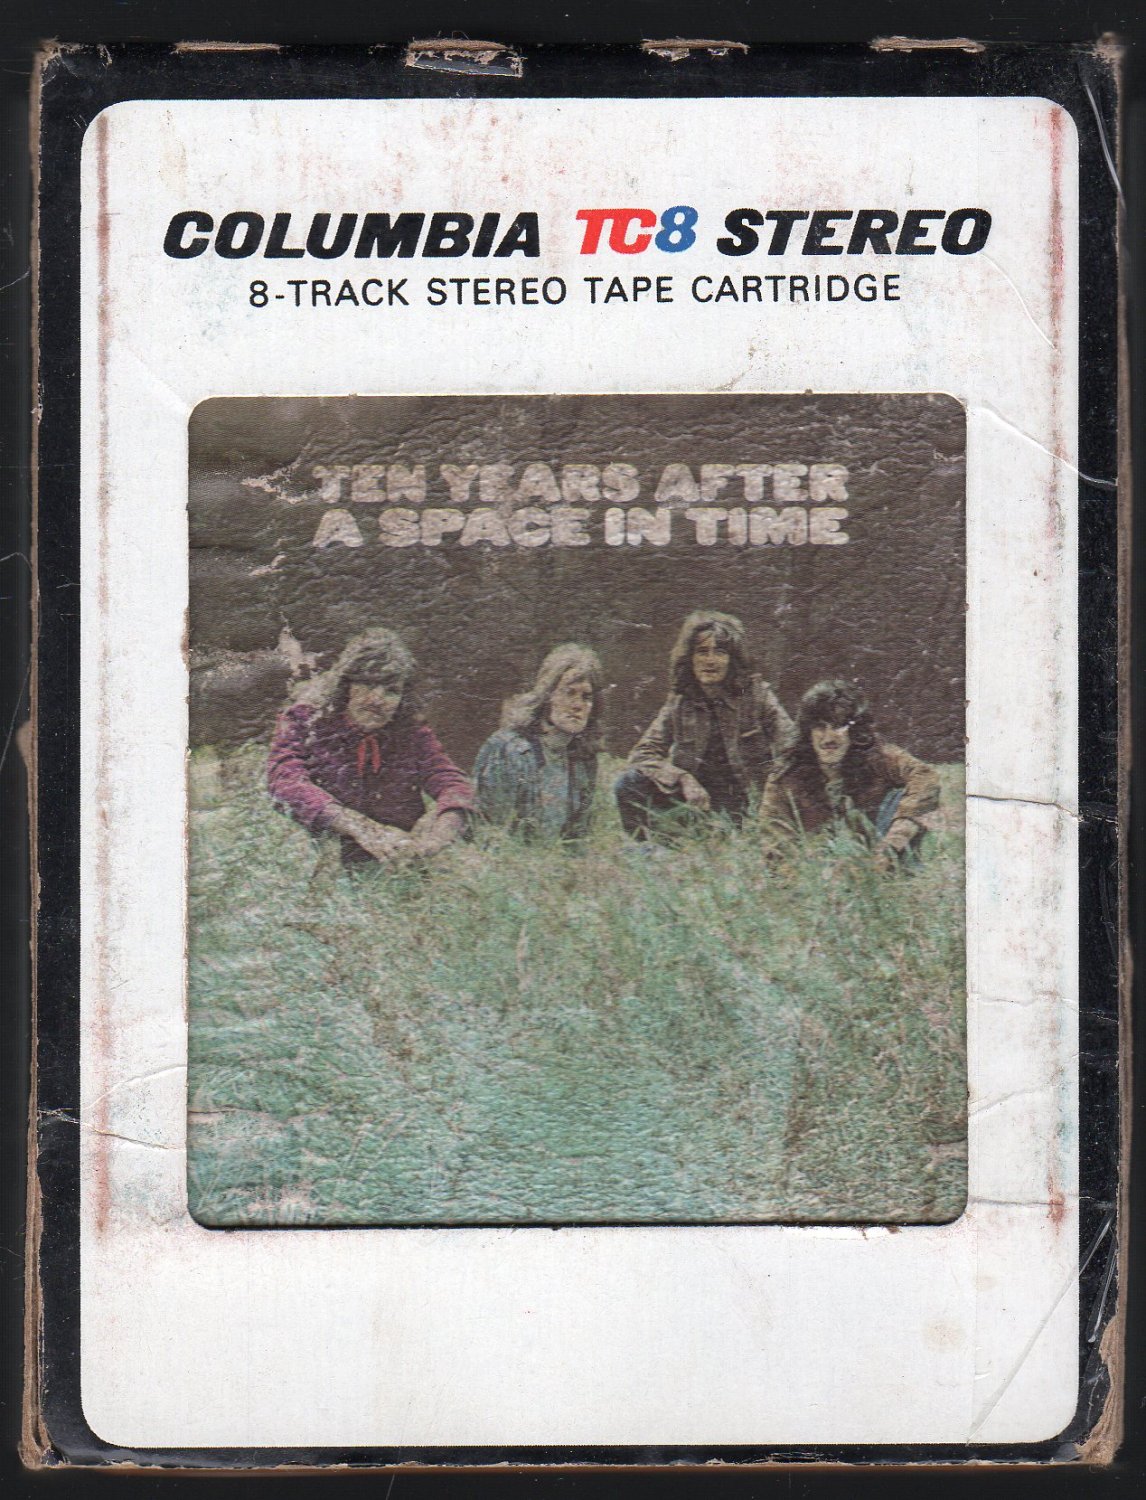 ten years after a space in time album art